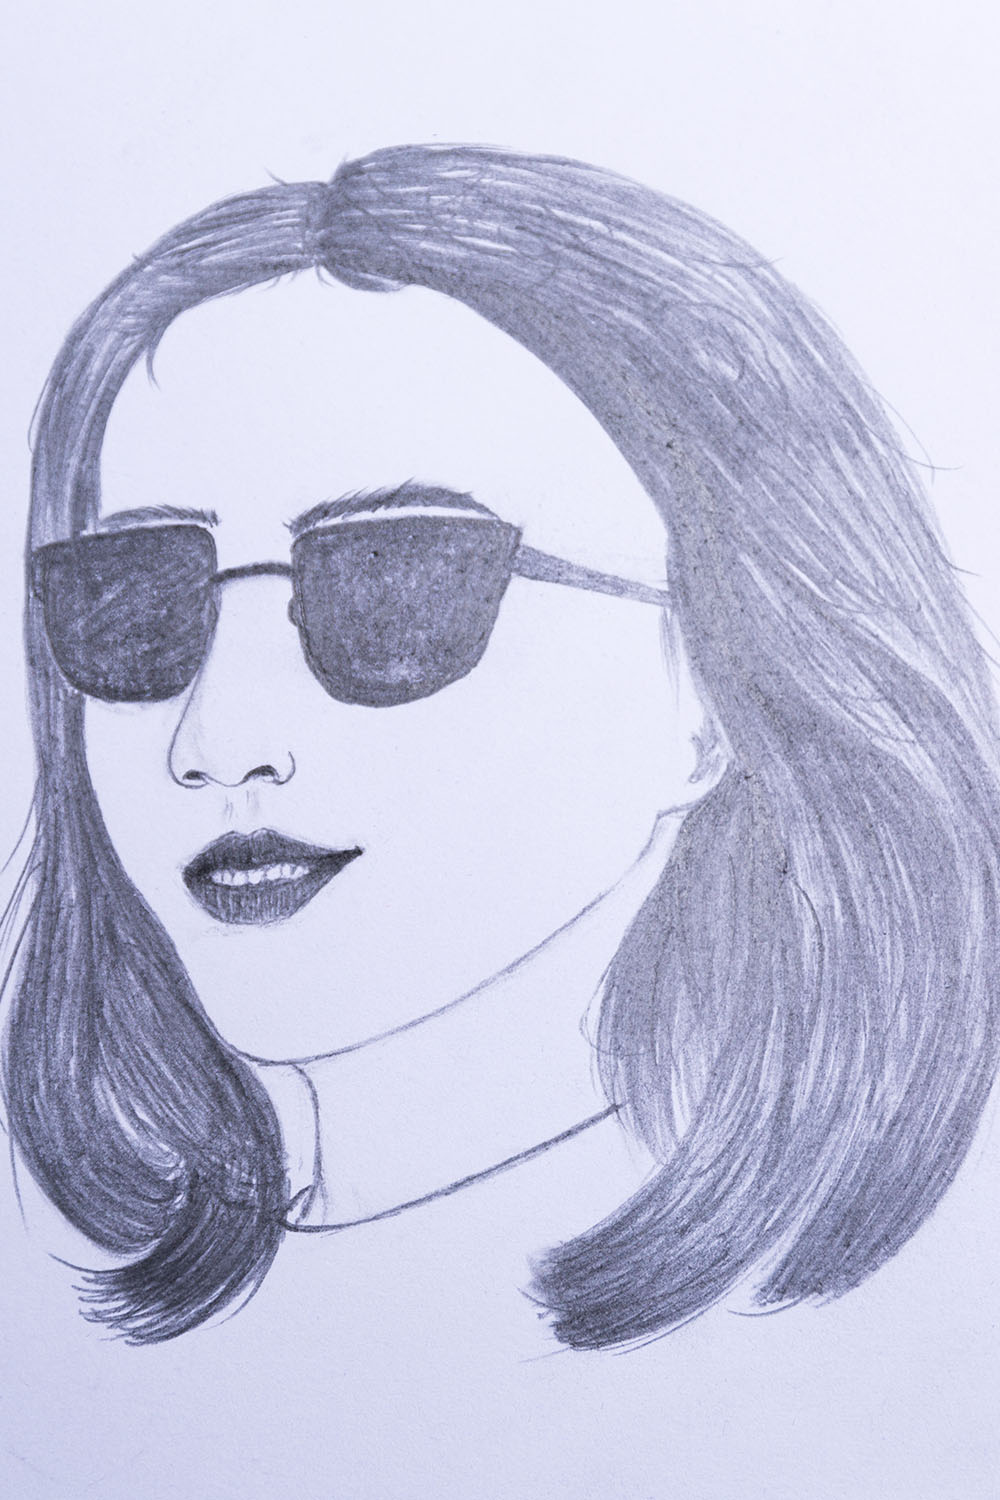 How to draw a girl wearing sunglasses